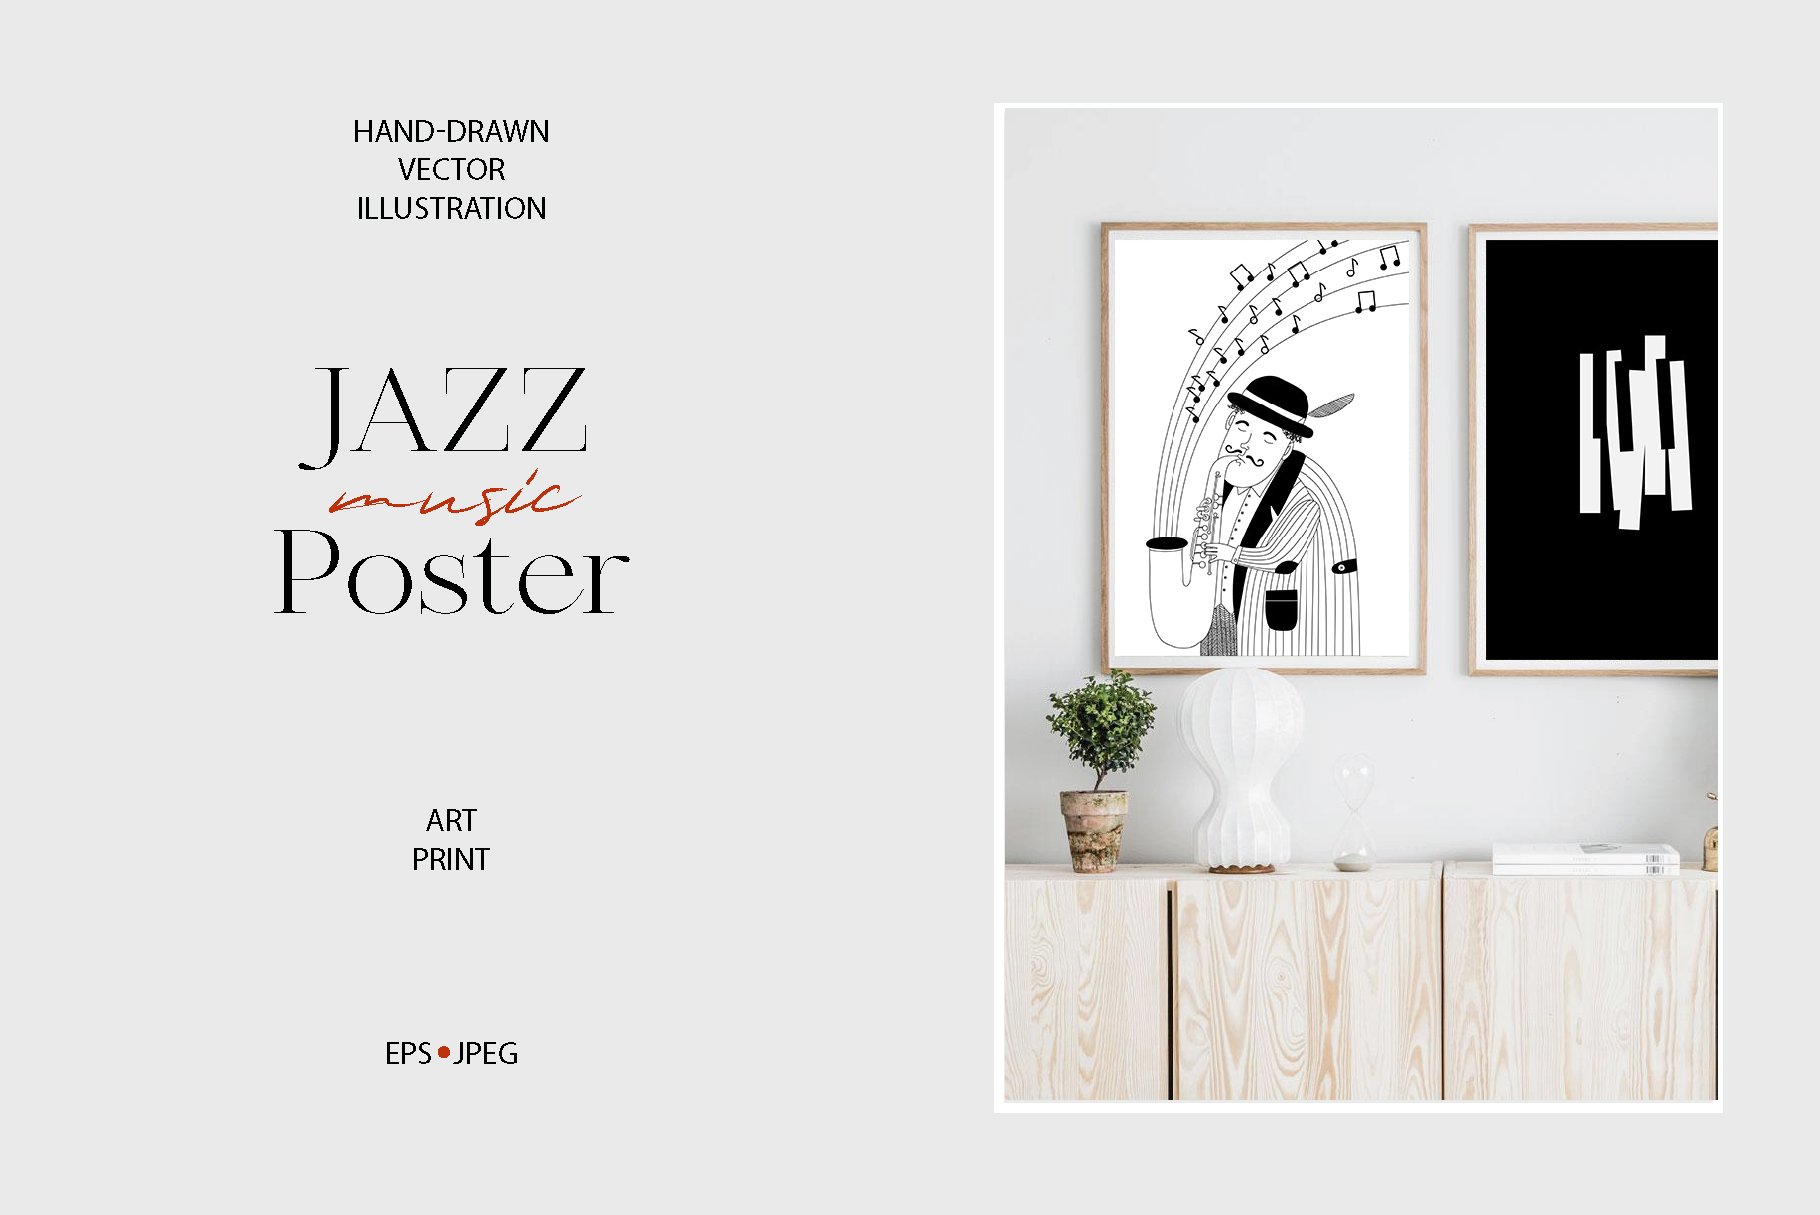 JAZZ POSTER cover image.